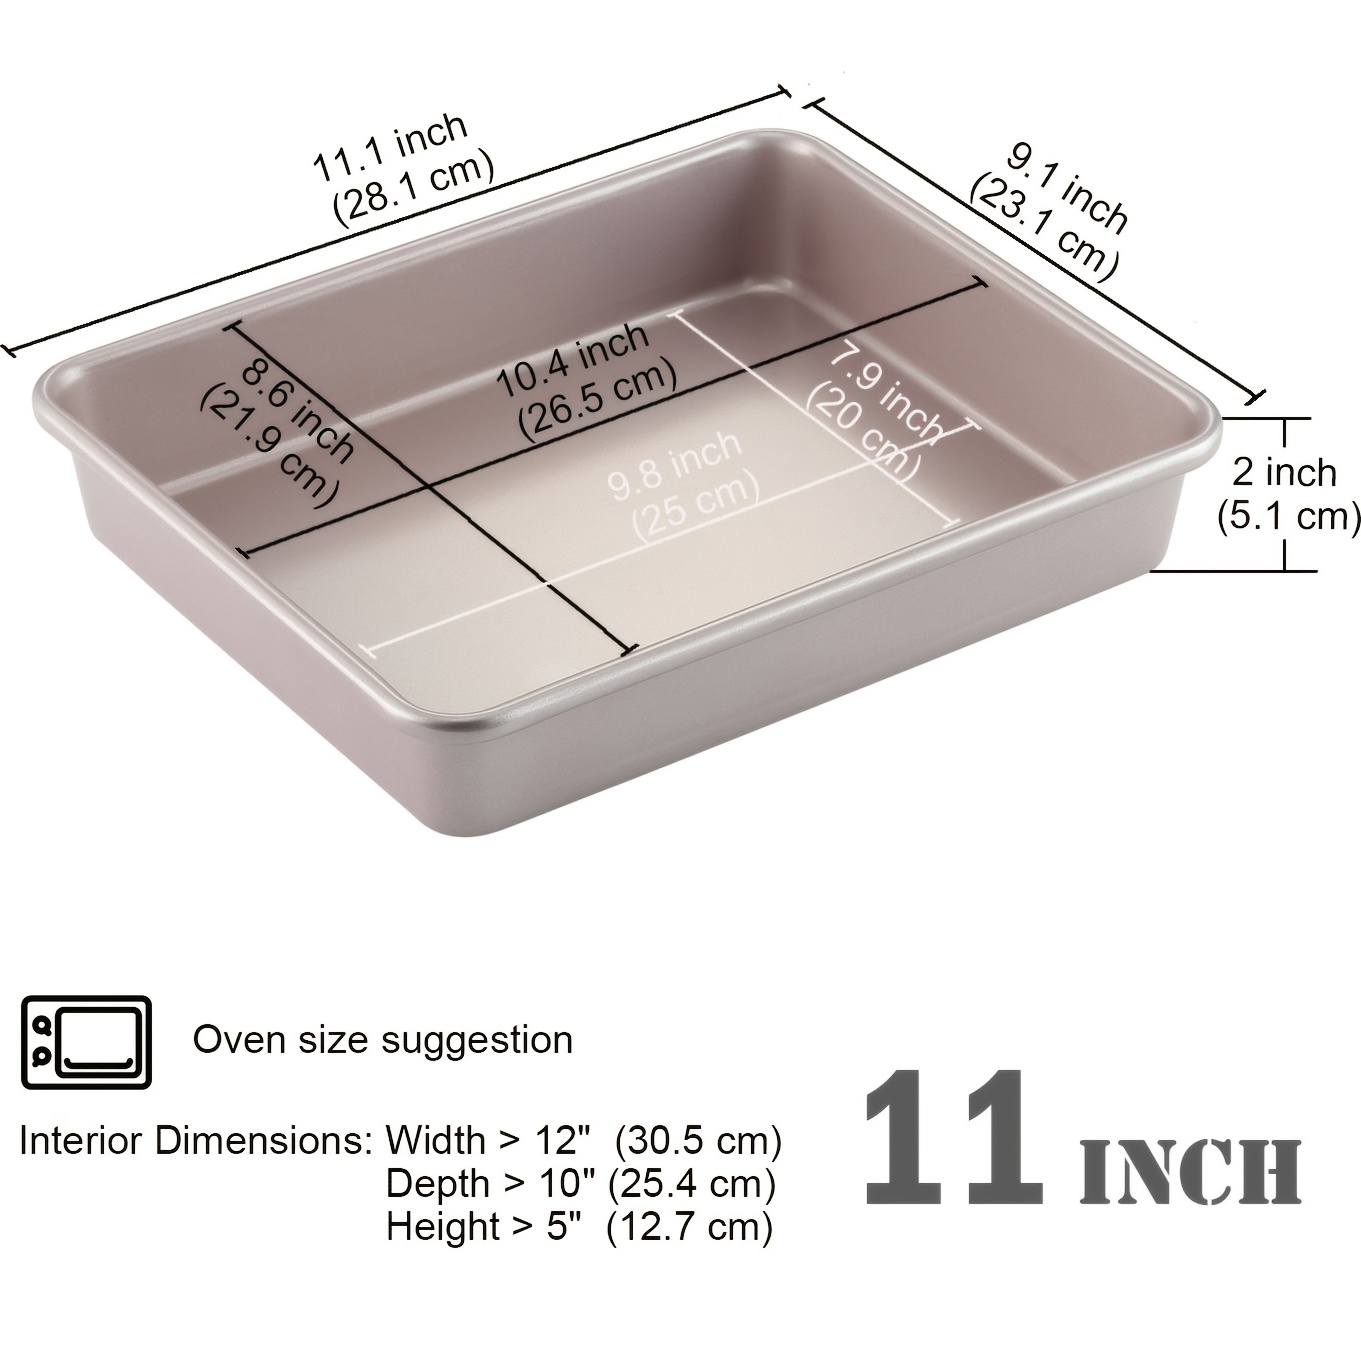 11 x 12 Cookie Sheet - CHEFMADE official store